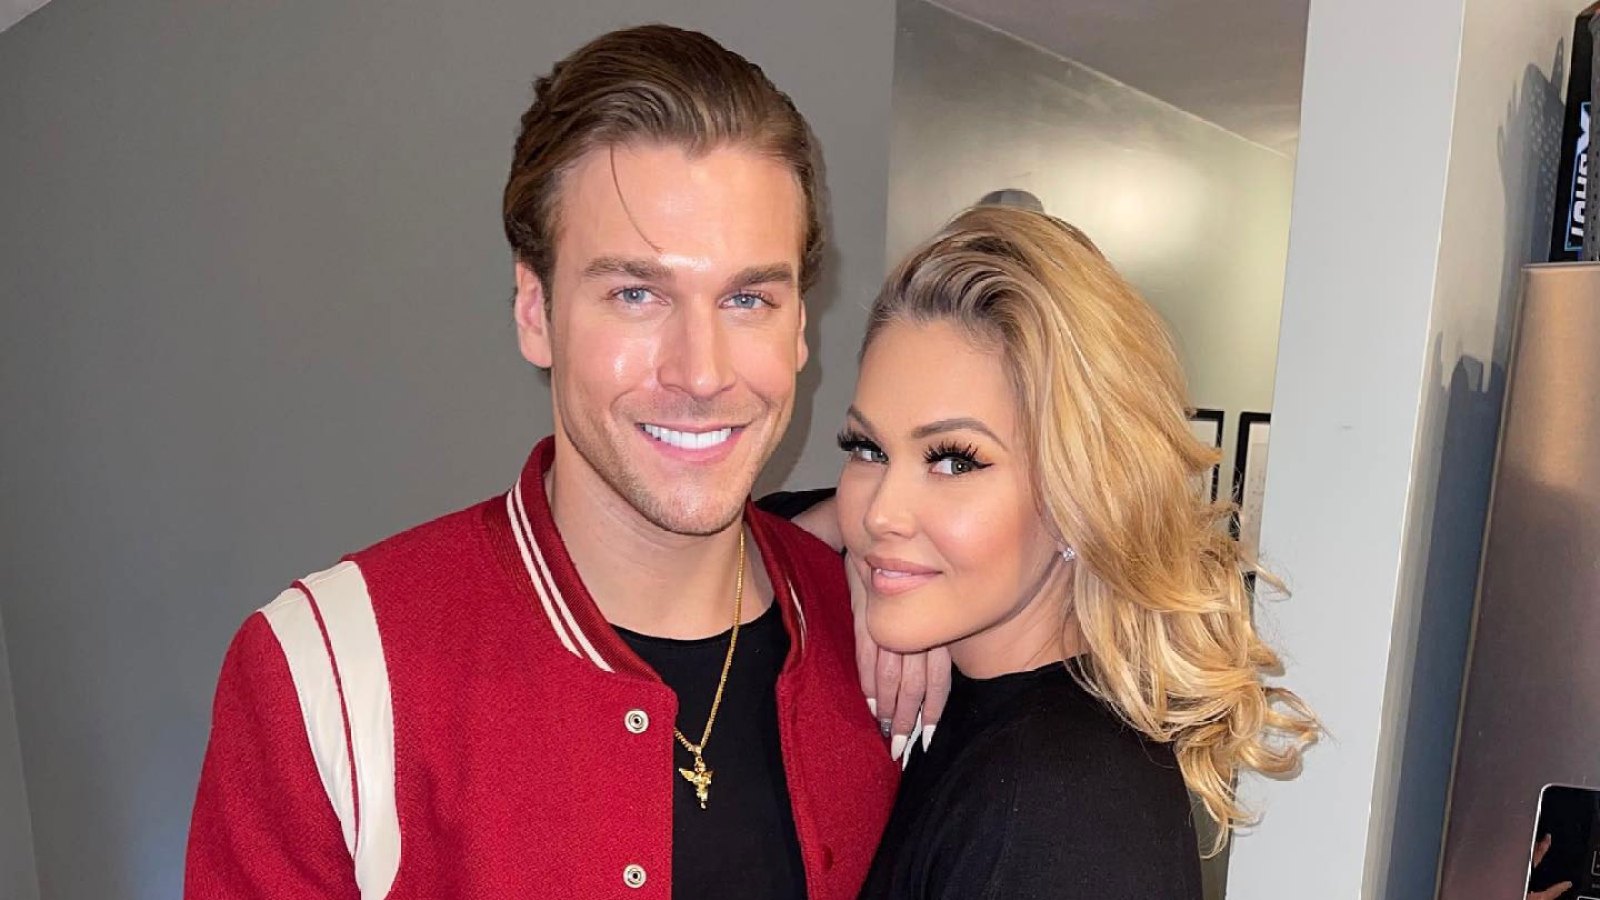 Shanna Moakler Says She Had an Amazing Valentine’s Day Amid Matthew Rondeau Split Speculation